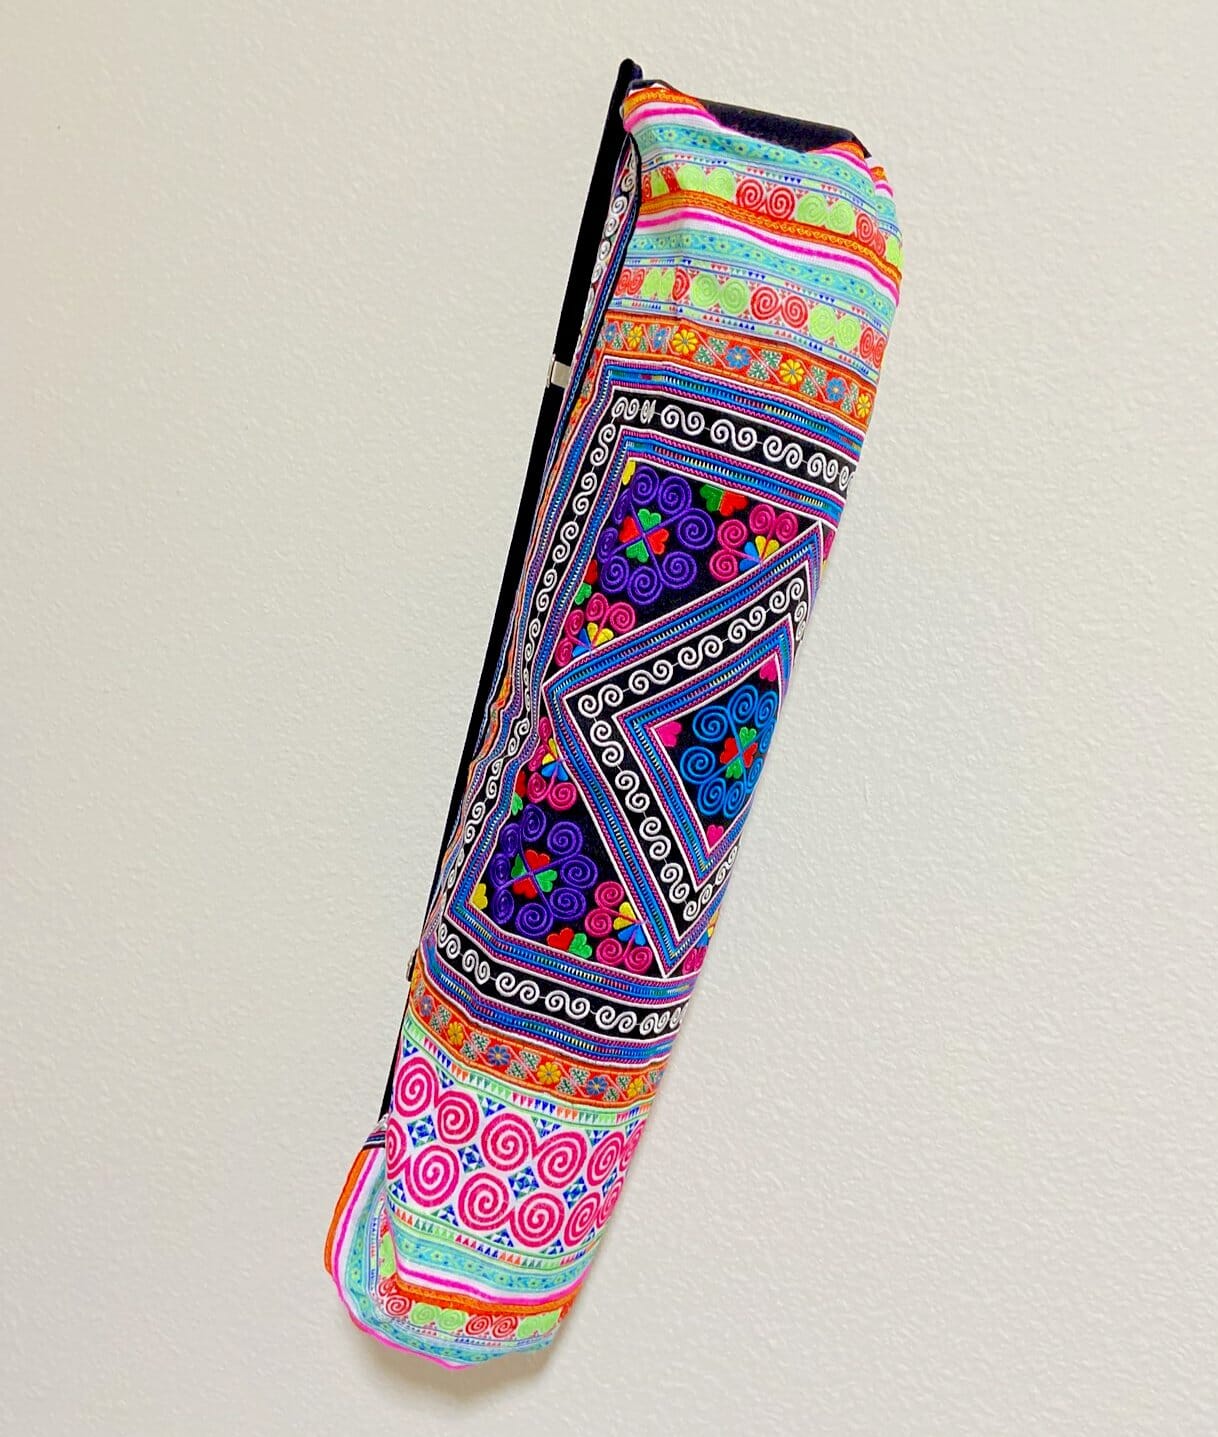 Colorful Embroidered Yoga-Mat Carrier - Boho Style Yoga Mat Bag YOGA MAT BAG Multicolor Diamonds 